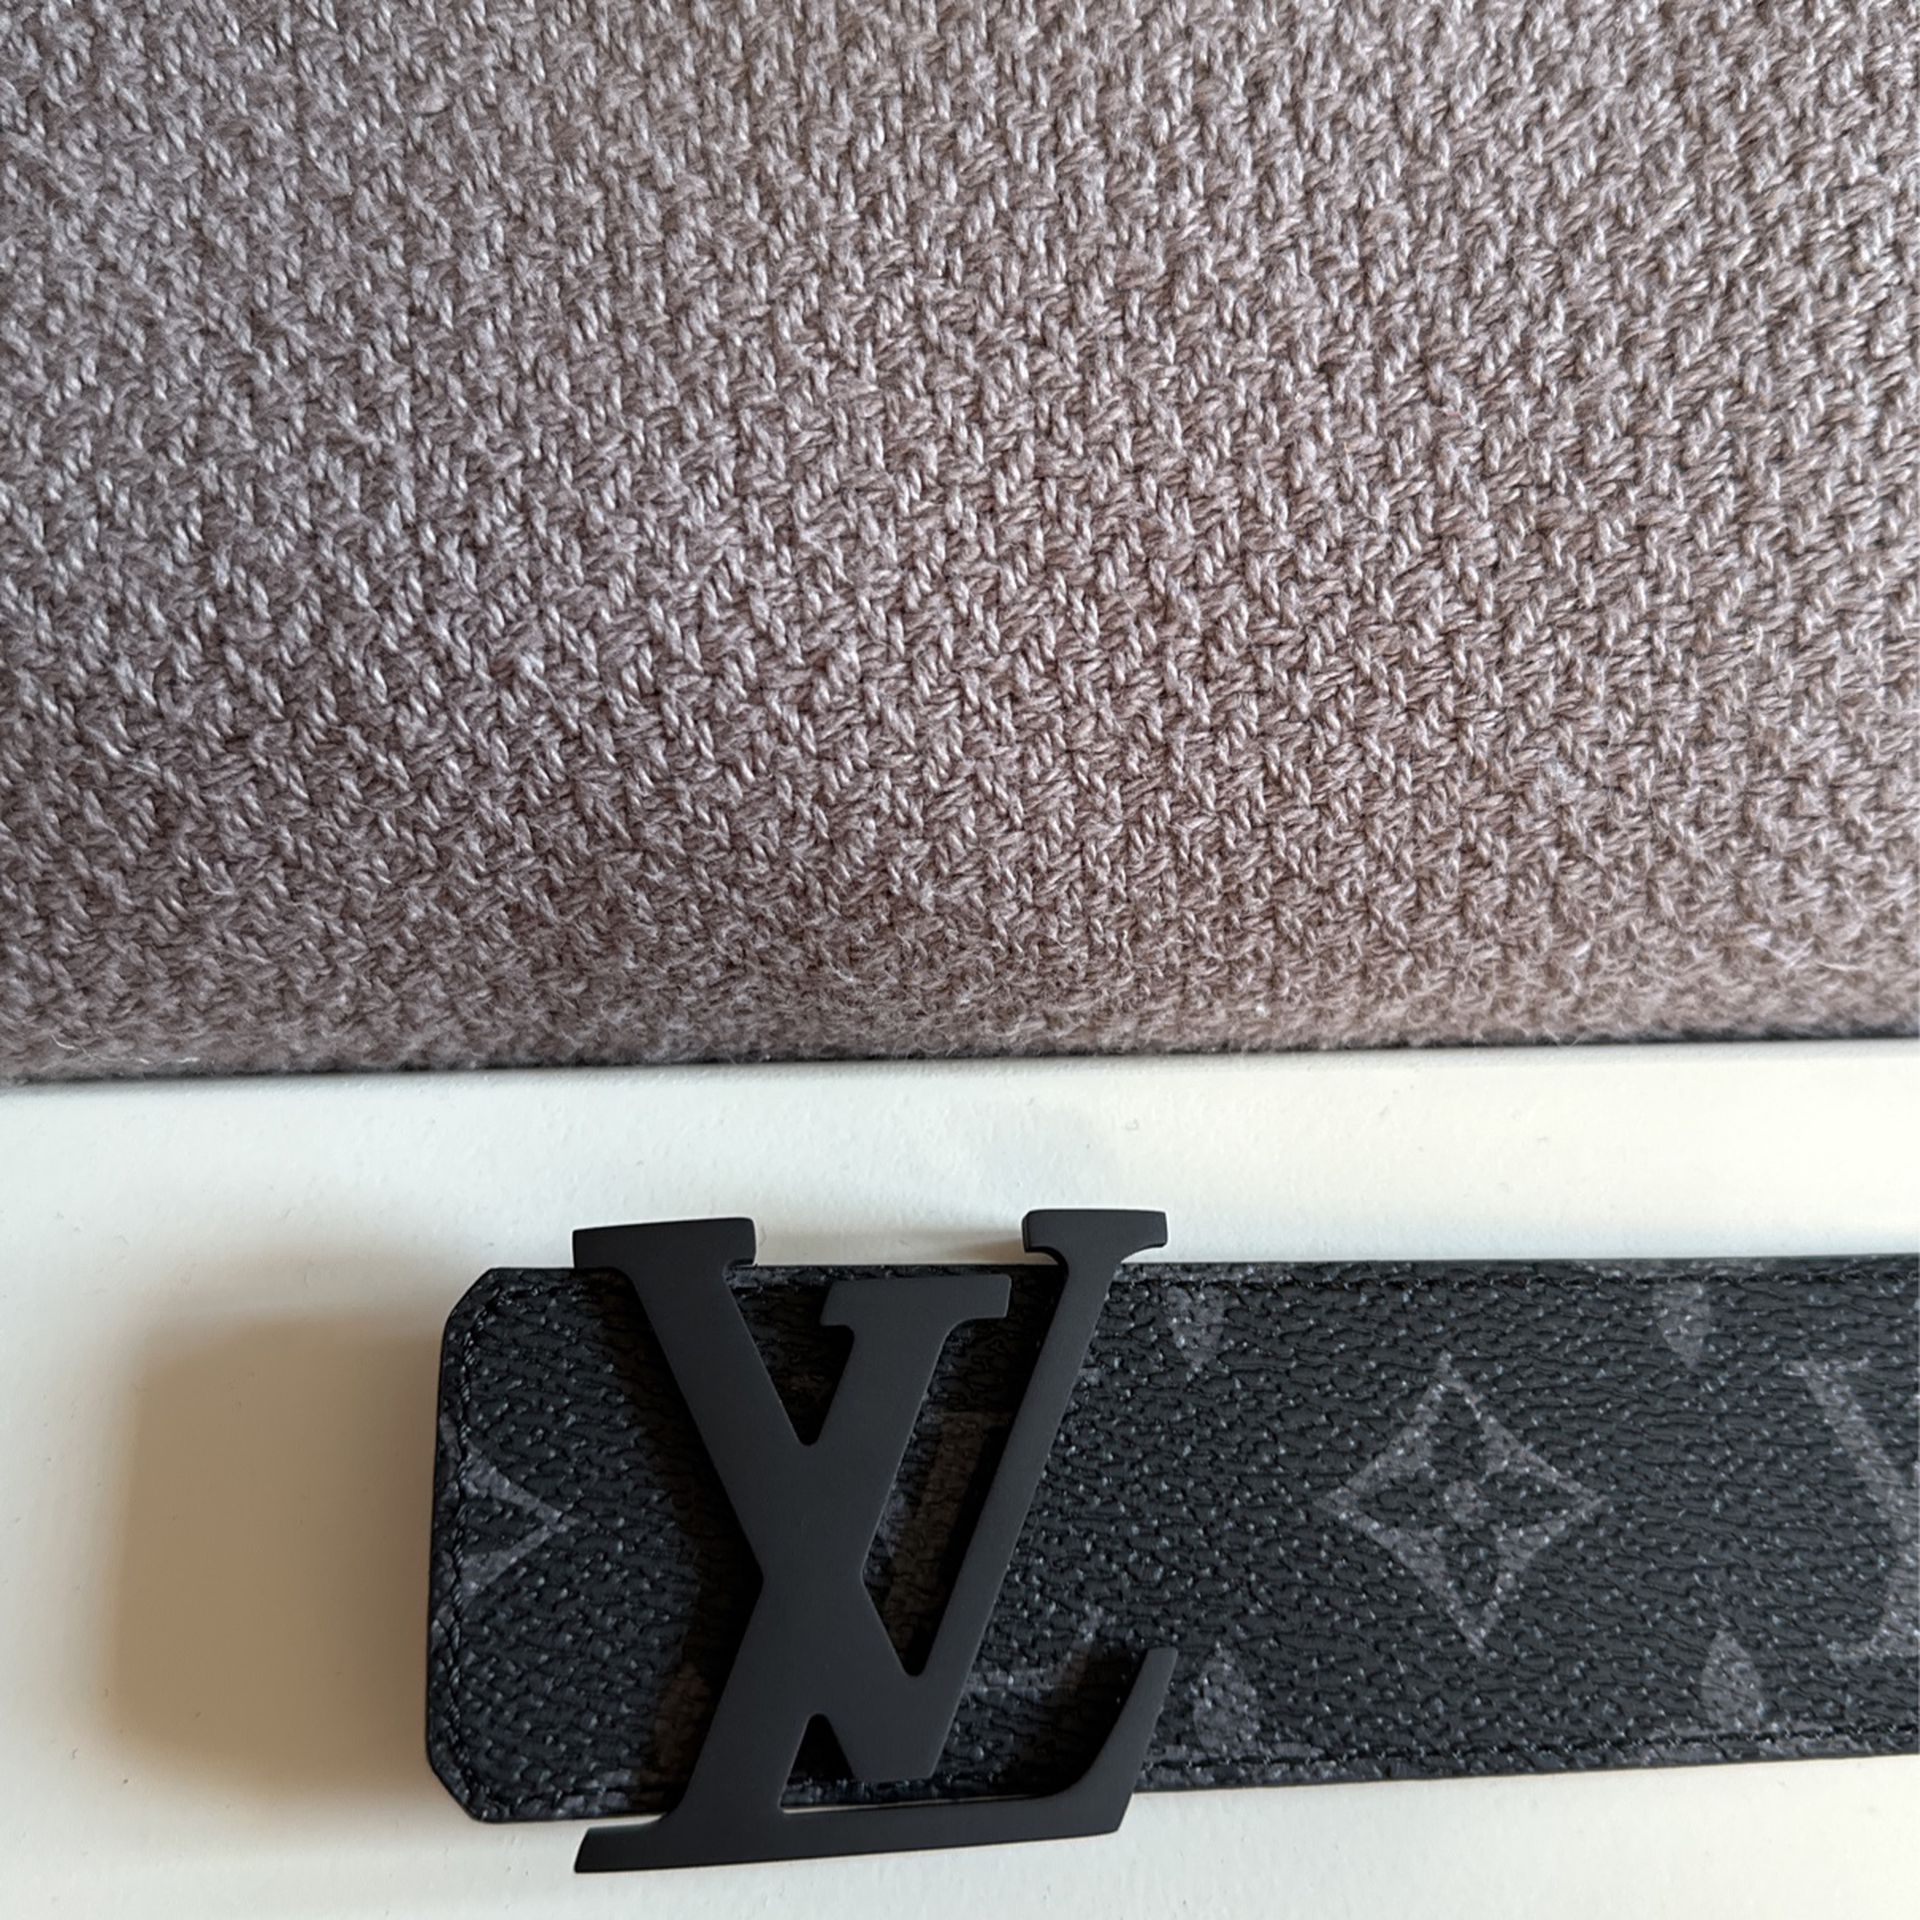 New LOUIS VUITTON GRAPHITE BELT 100 Cm 34/36 WAIST for Sale in New York, NY  - OfferUp